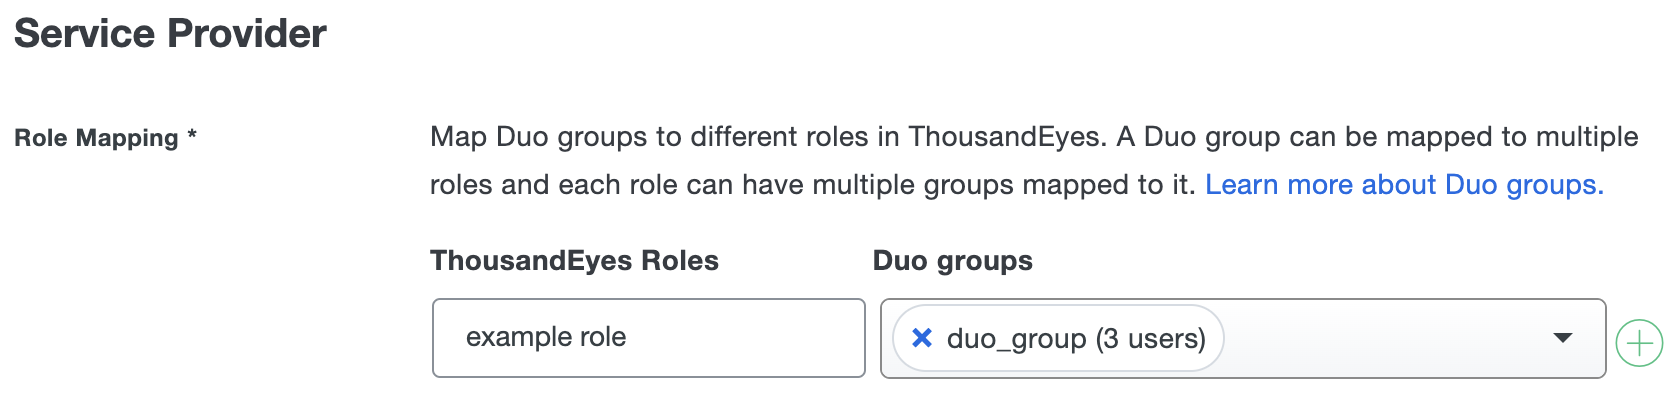 Duo ThousandEyes Role Mapping Fields